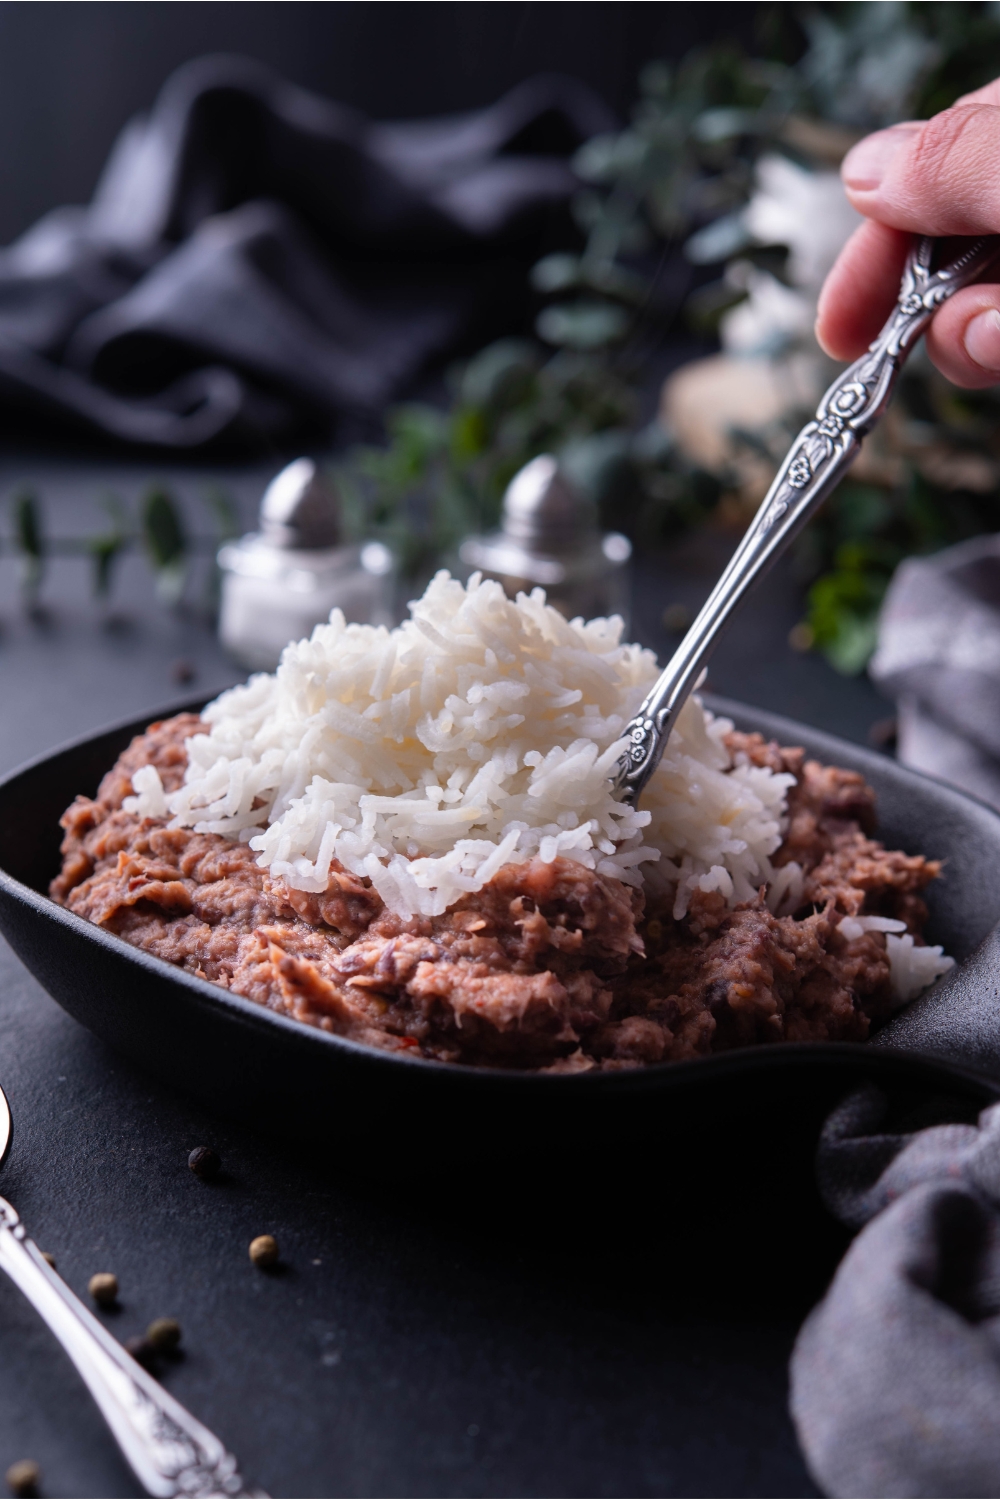 A hand scooping a bite of beans and rice with a fork from a black bowl filled with beans and rice.